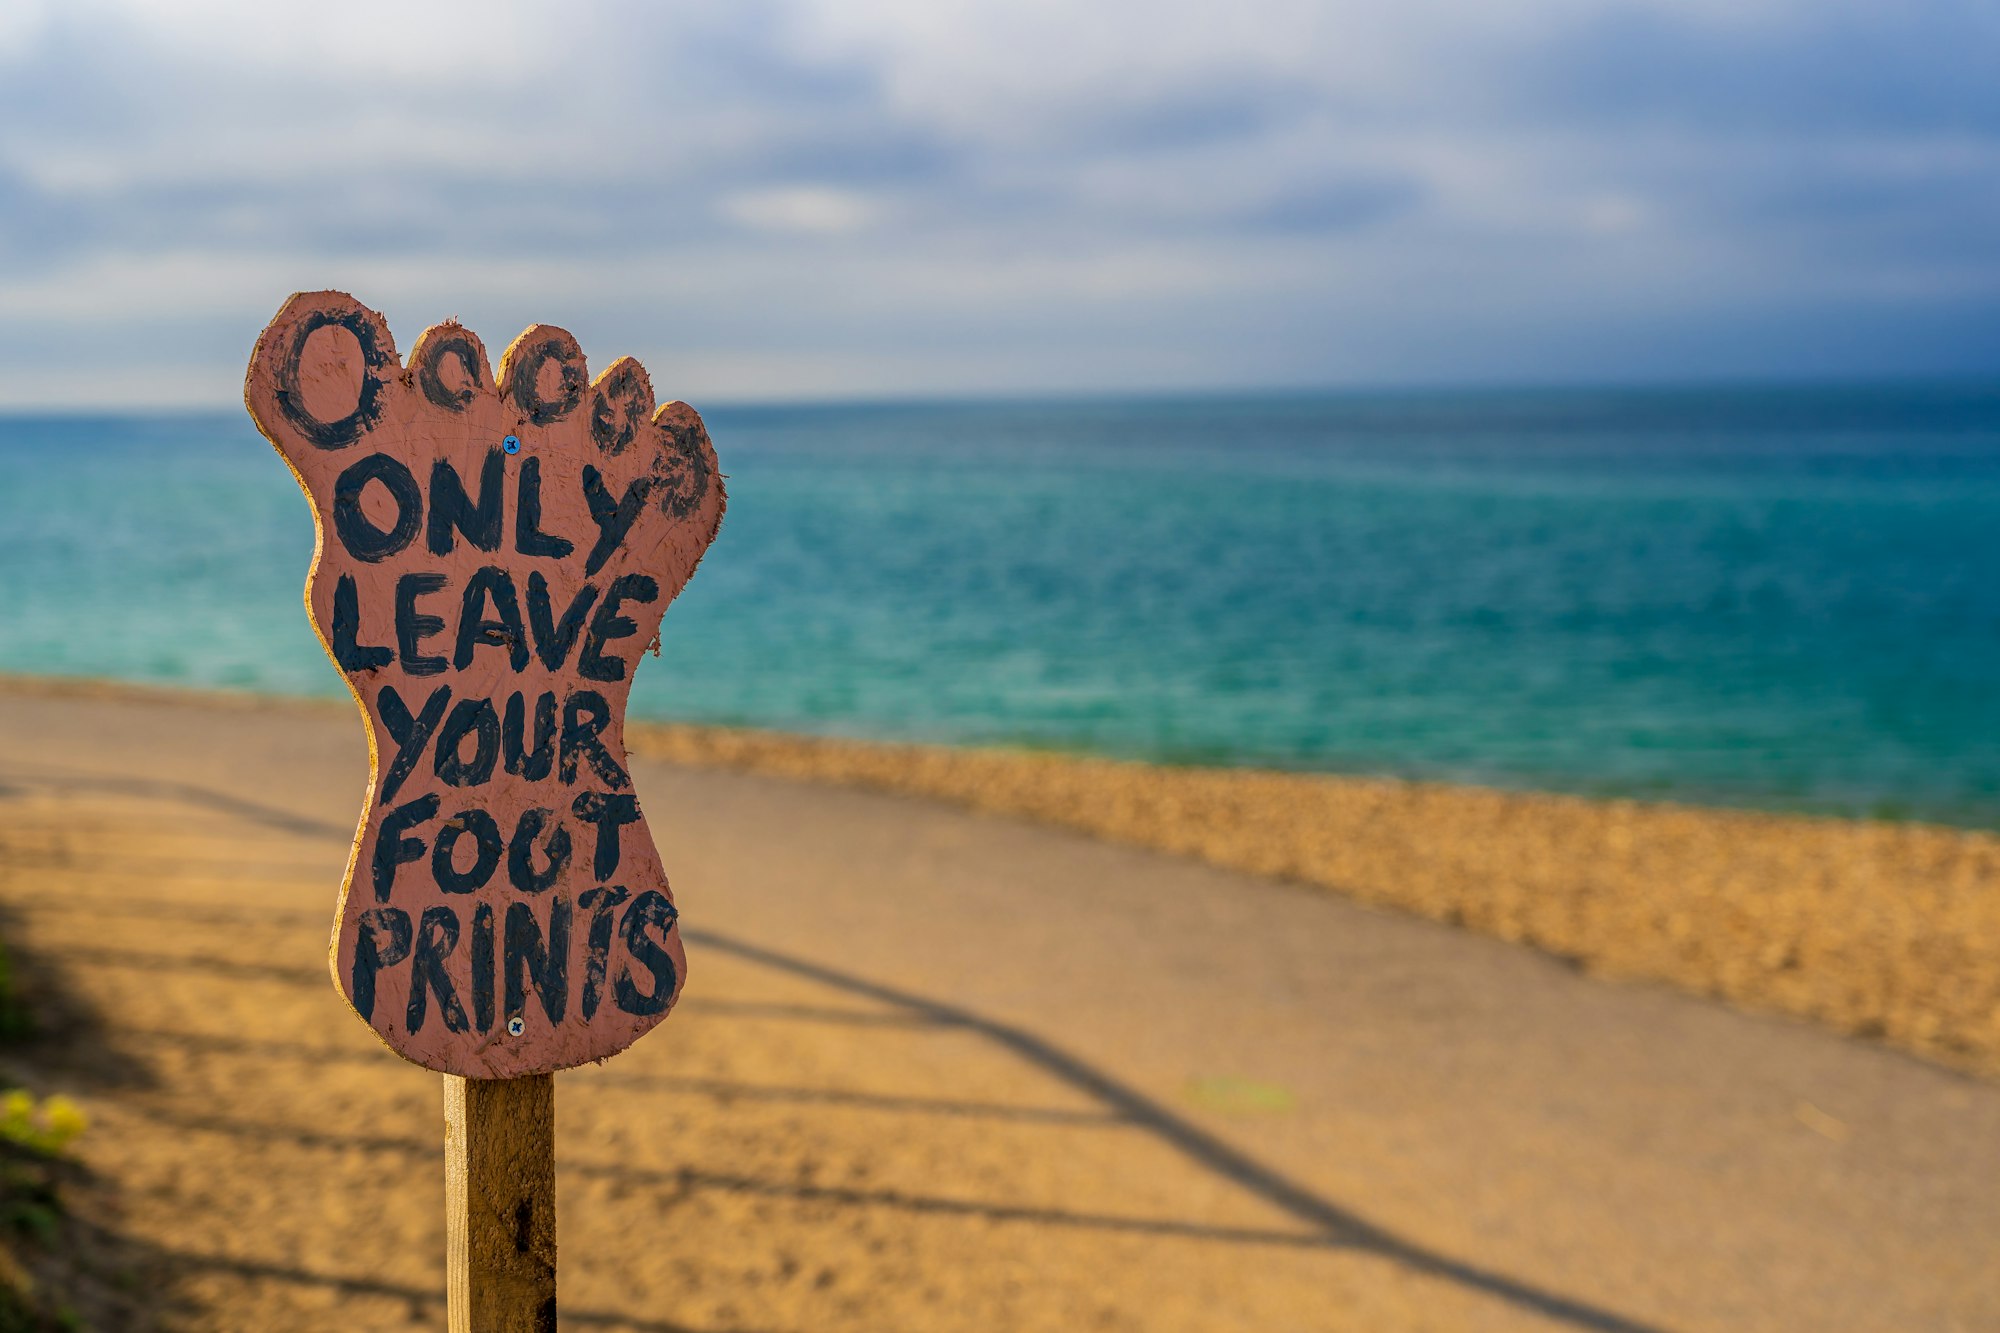 A great sign just before you get to the beach at Hengistbury Head, Dorset, reminding people to take home all their rubbish with them.